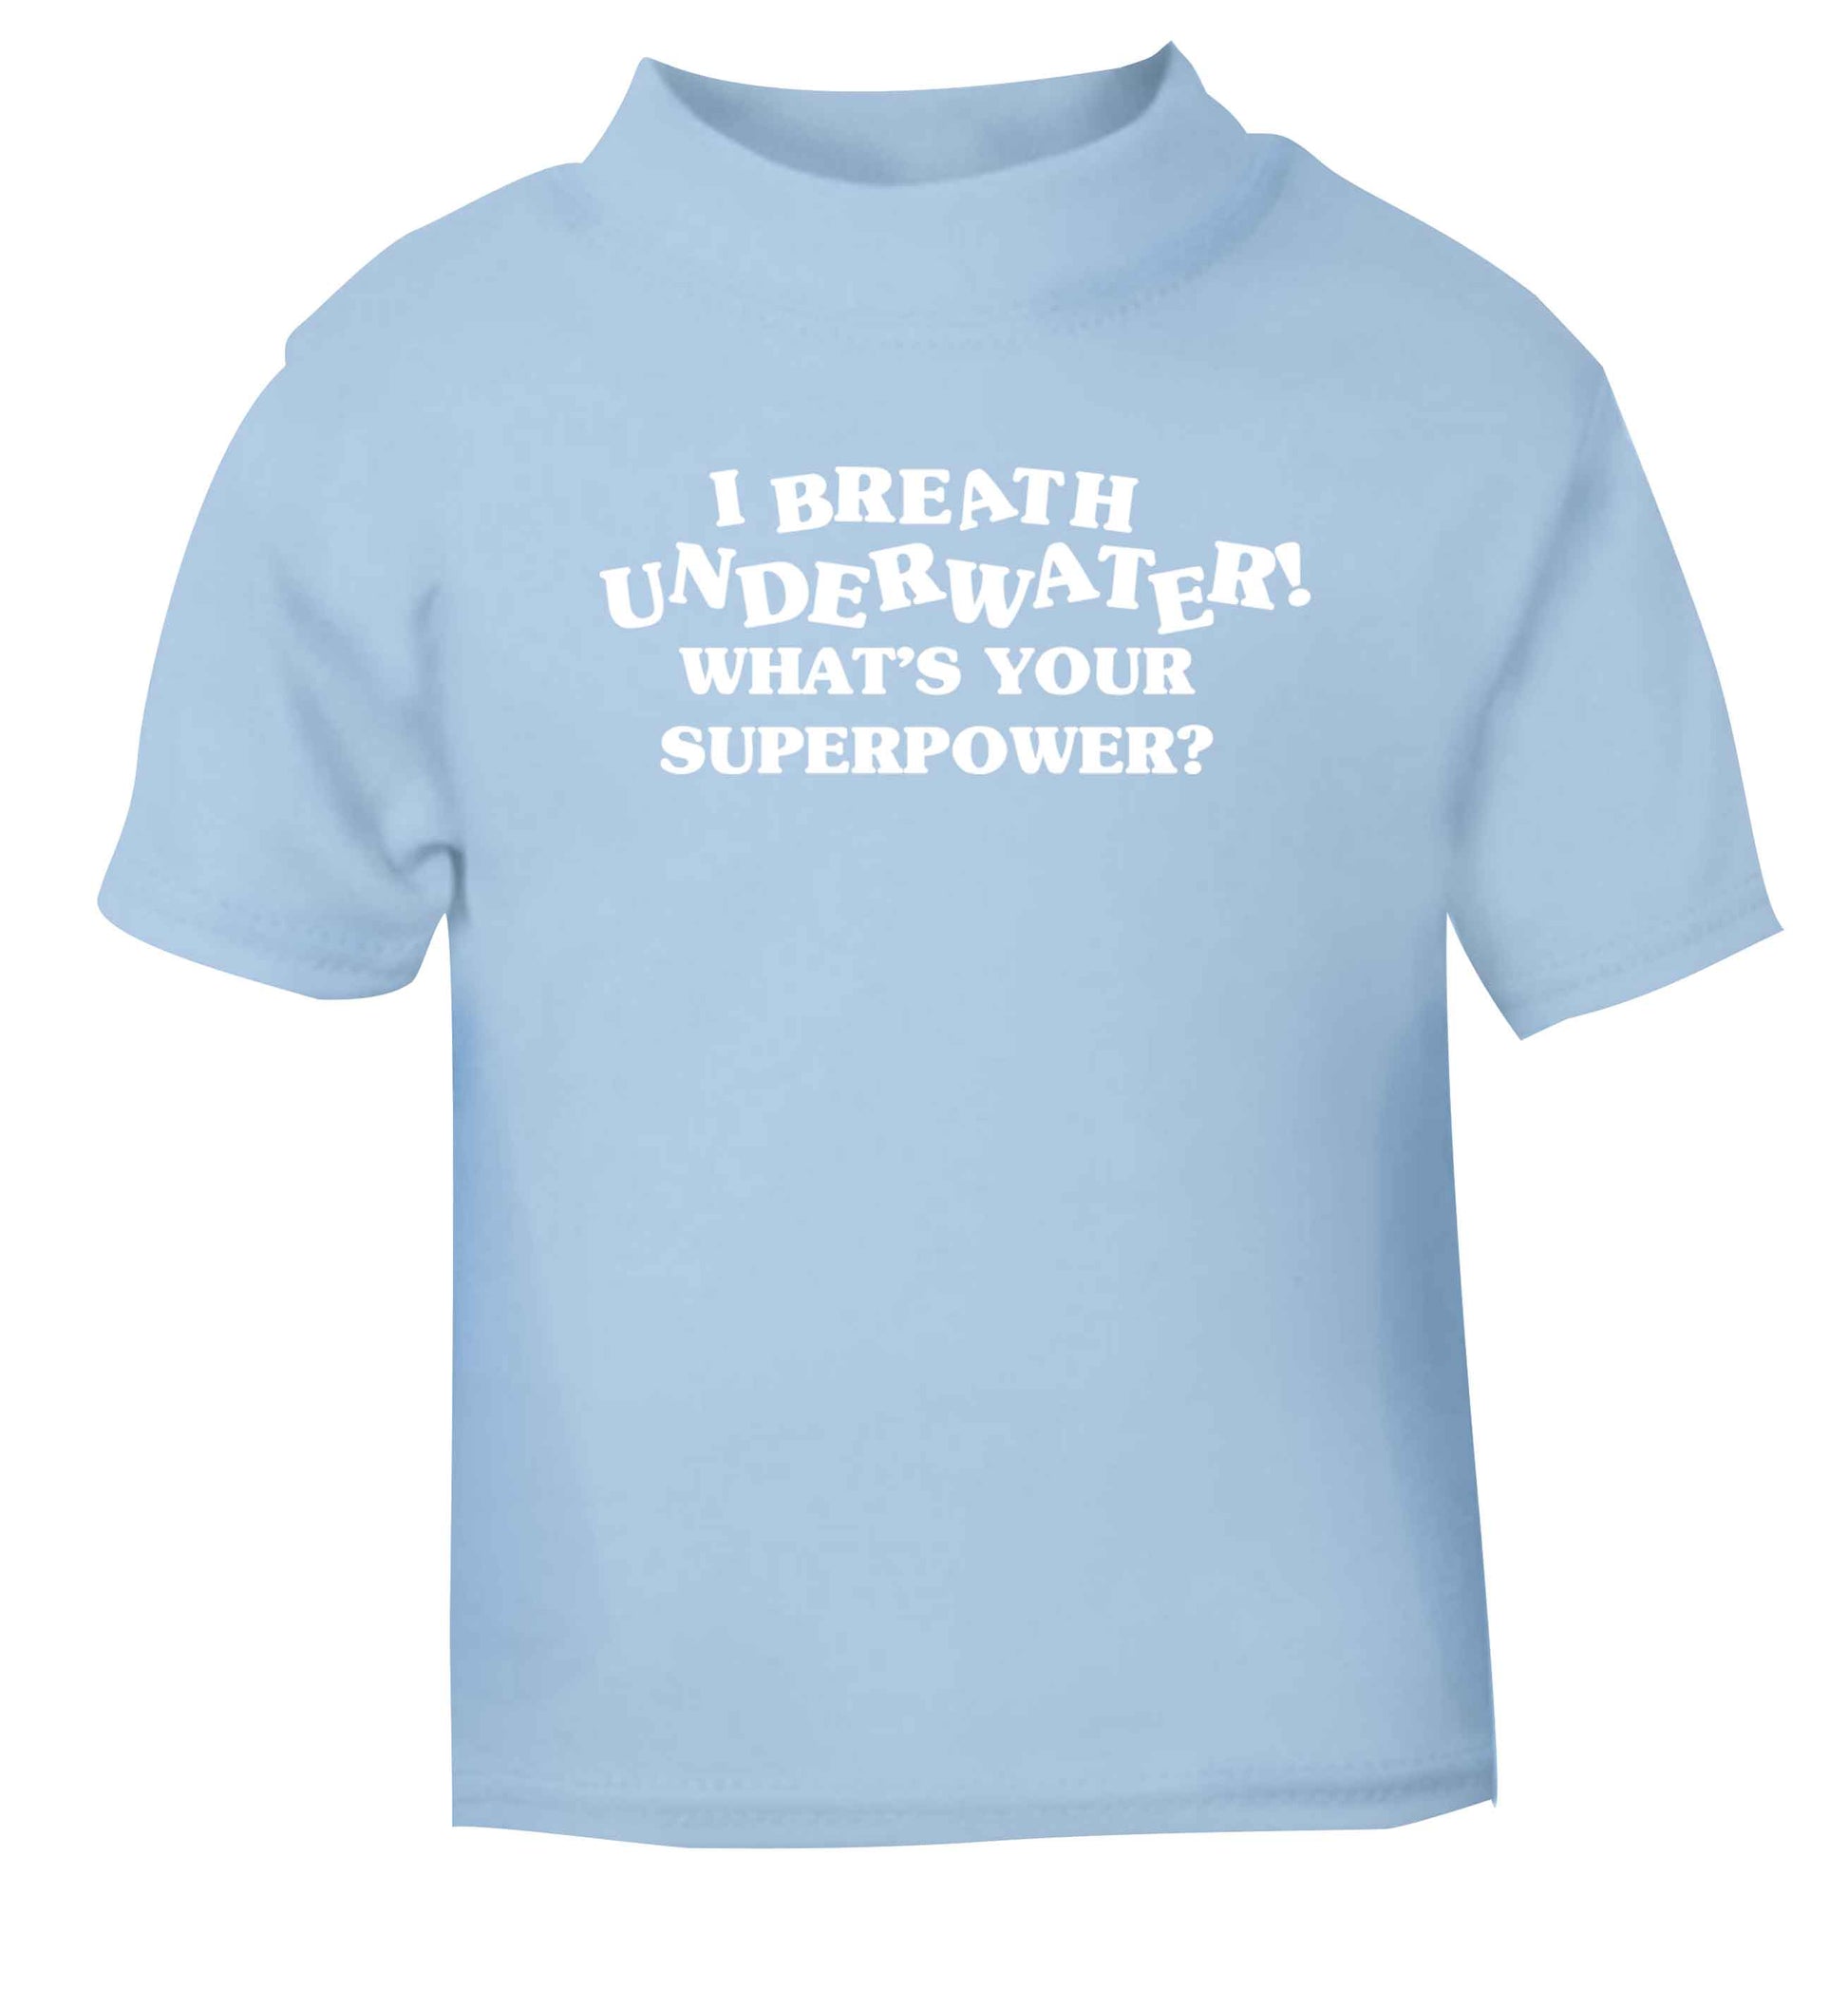 I breath underwater what's your superpower? light blue Baby Toddler Tshirt 2 Years